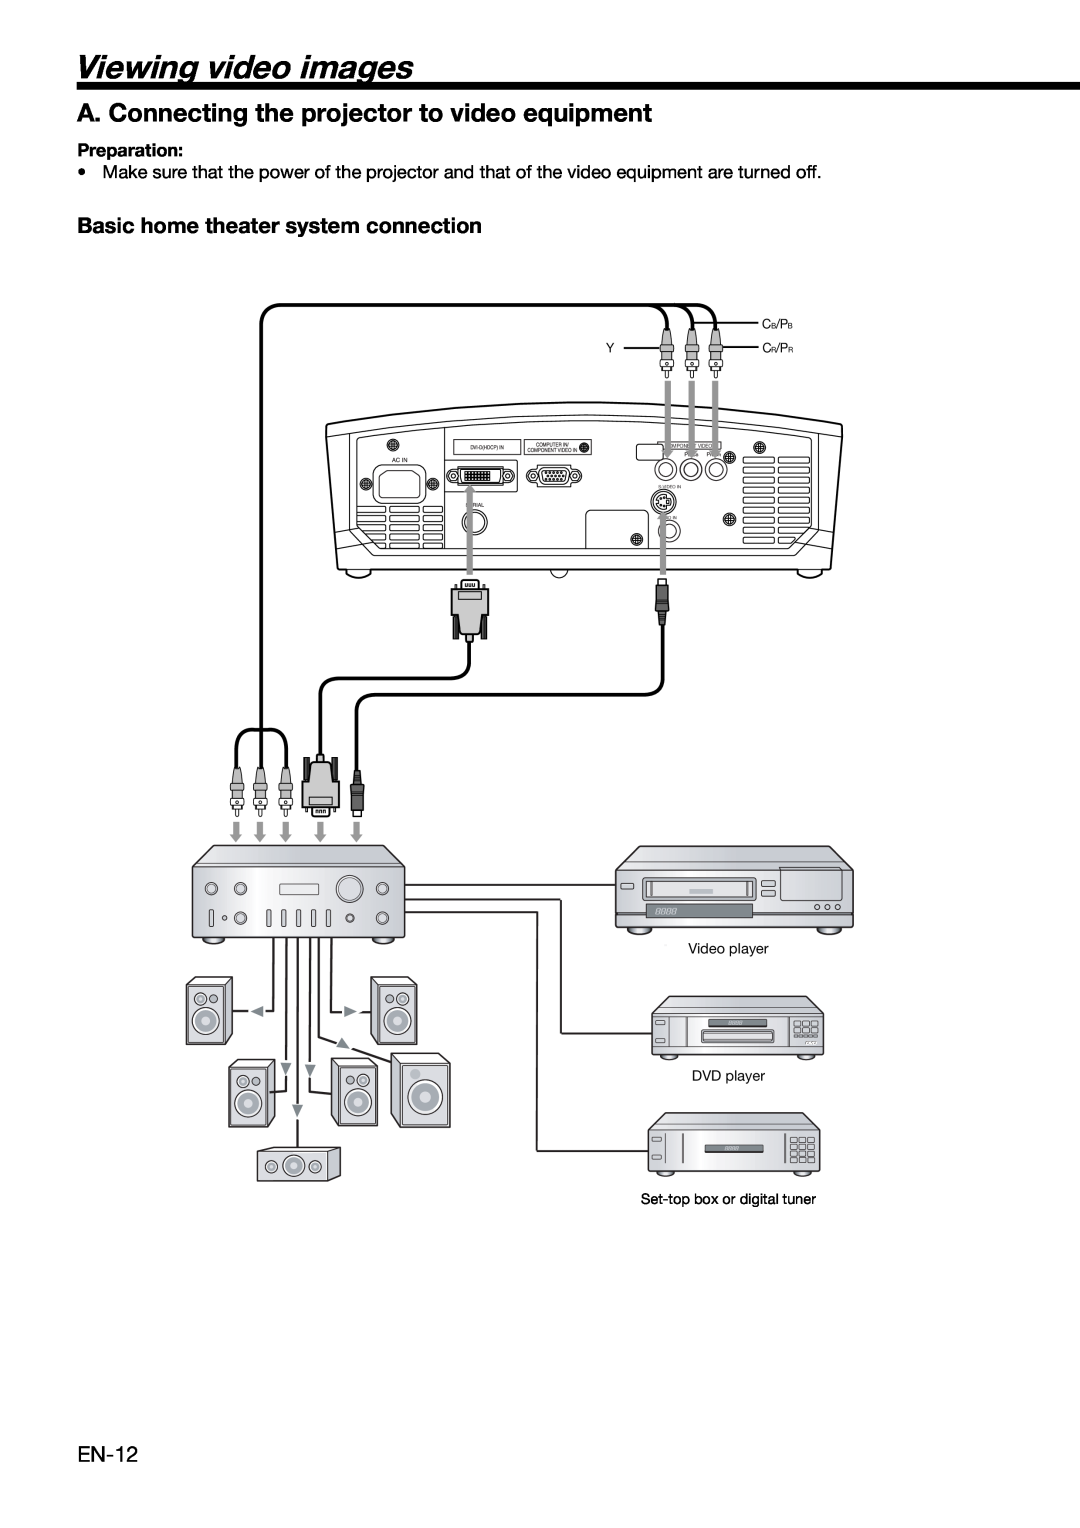 Mitsubishi Electronics HC910 user manual Viewing video images, A. Connecting the projector to video equipment, Preparation 